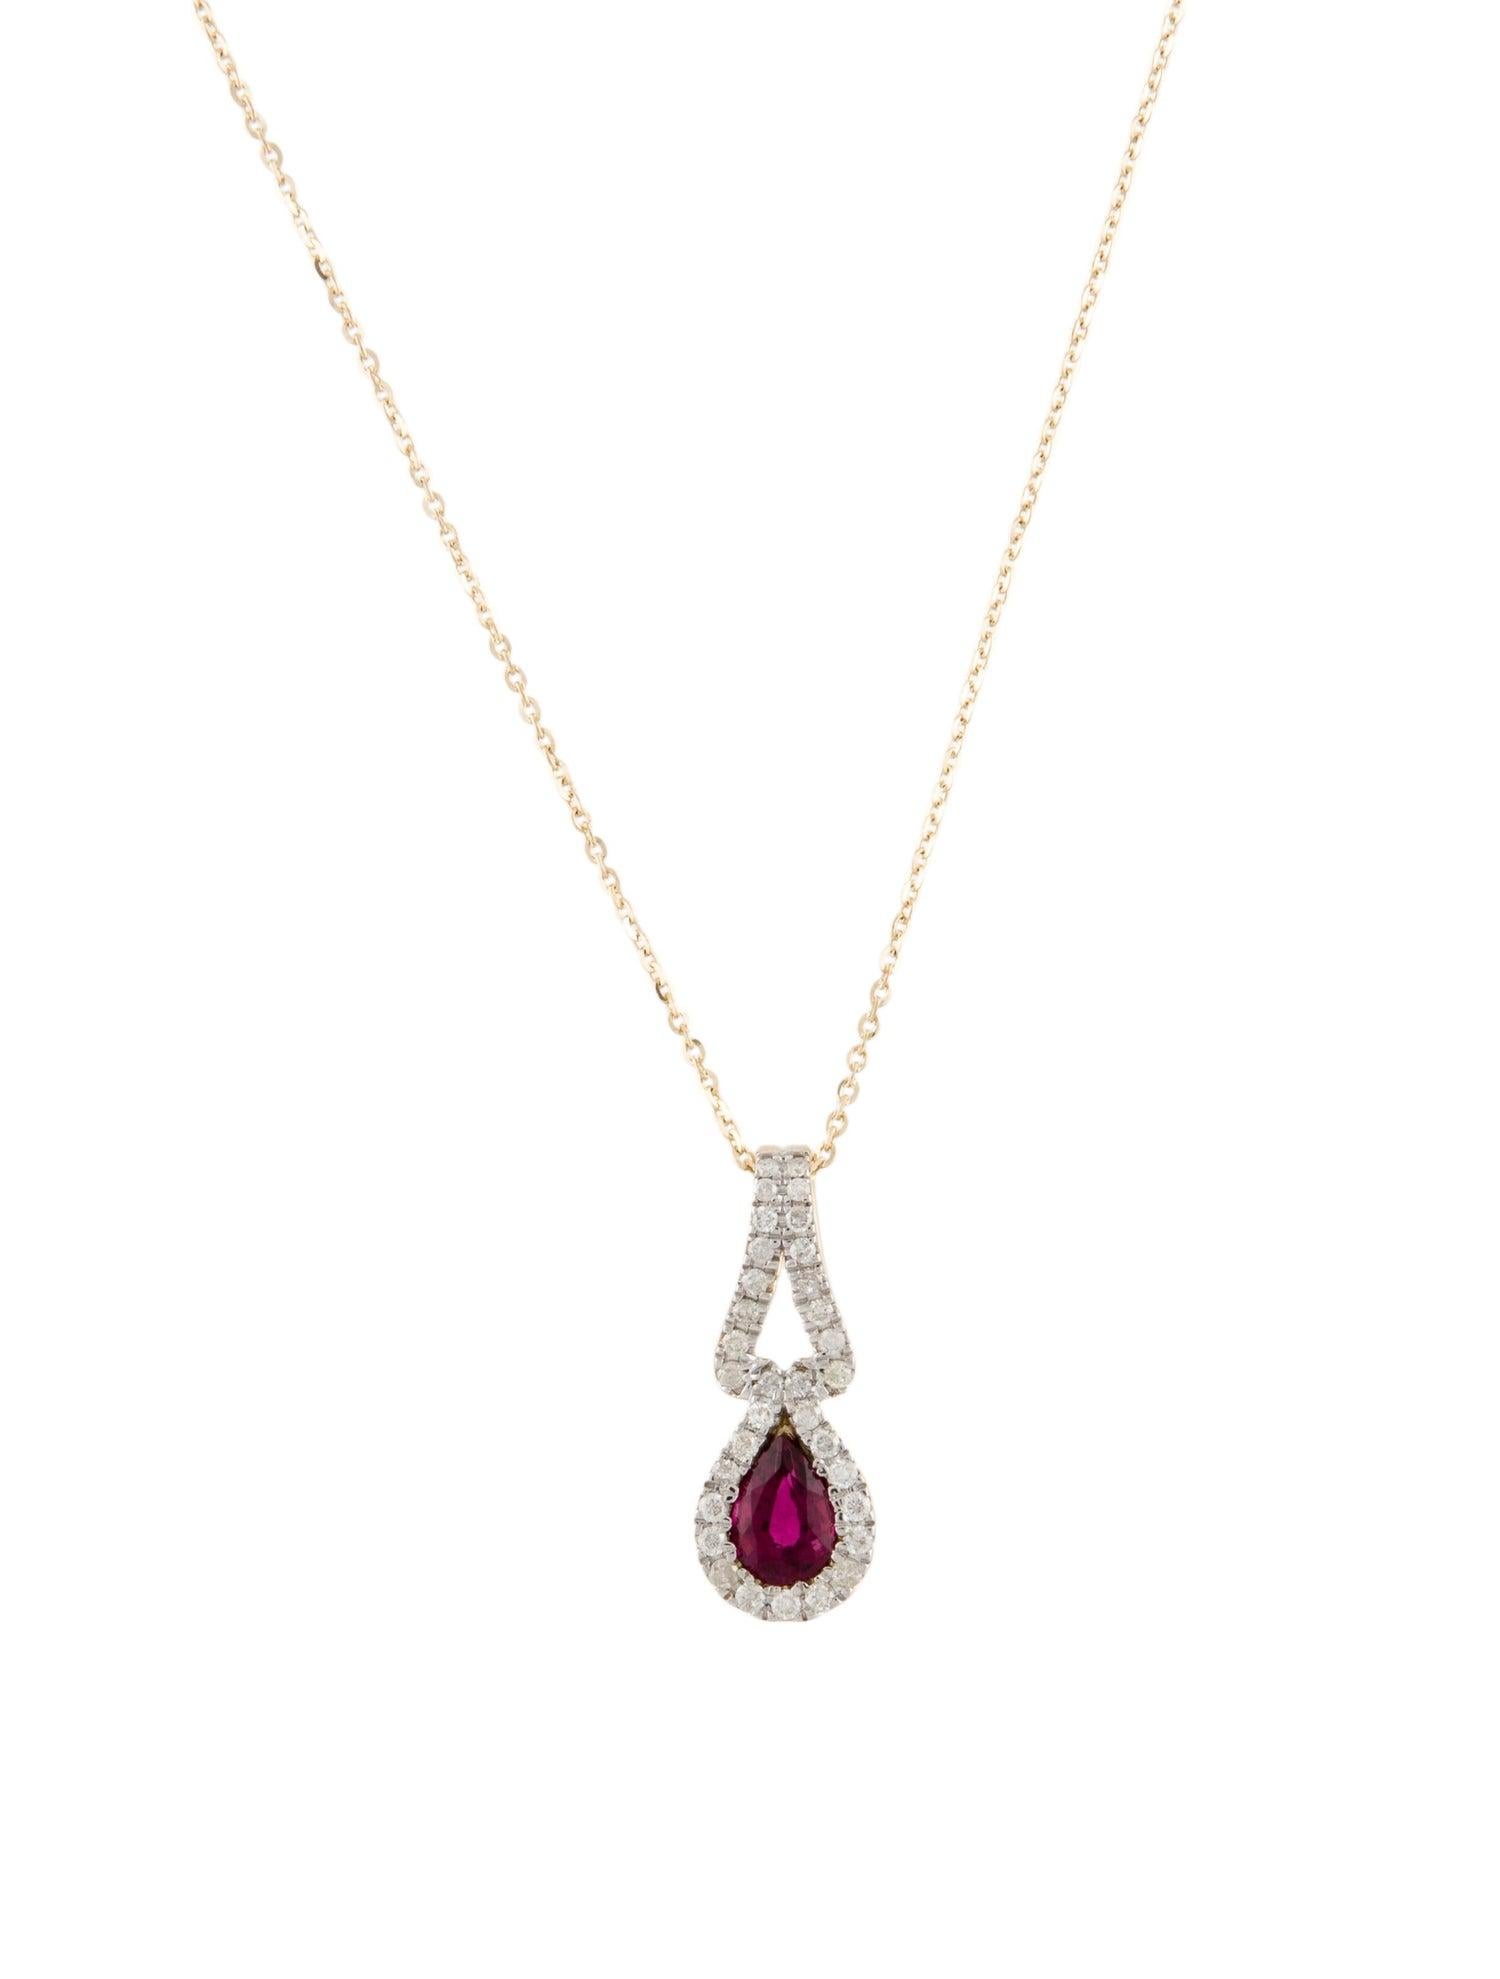 Evoke the fiery passion of nature's blooms with our exquisite Blooms of Passion Ruby Lite and Diamond Necklace. This radiant masterpiece from Jeweltique's Ruby Lite collection is a testament to our 50-year legacy of crafting fine jewelry.

Set in